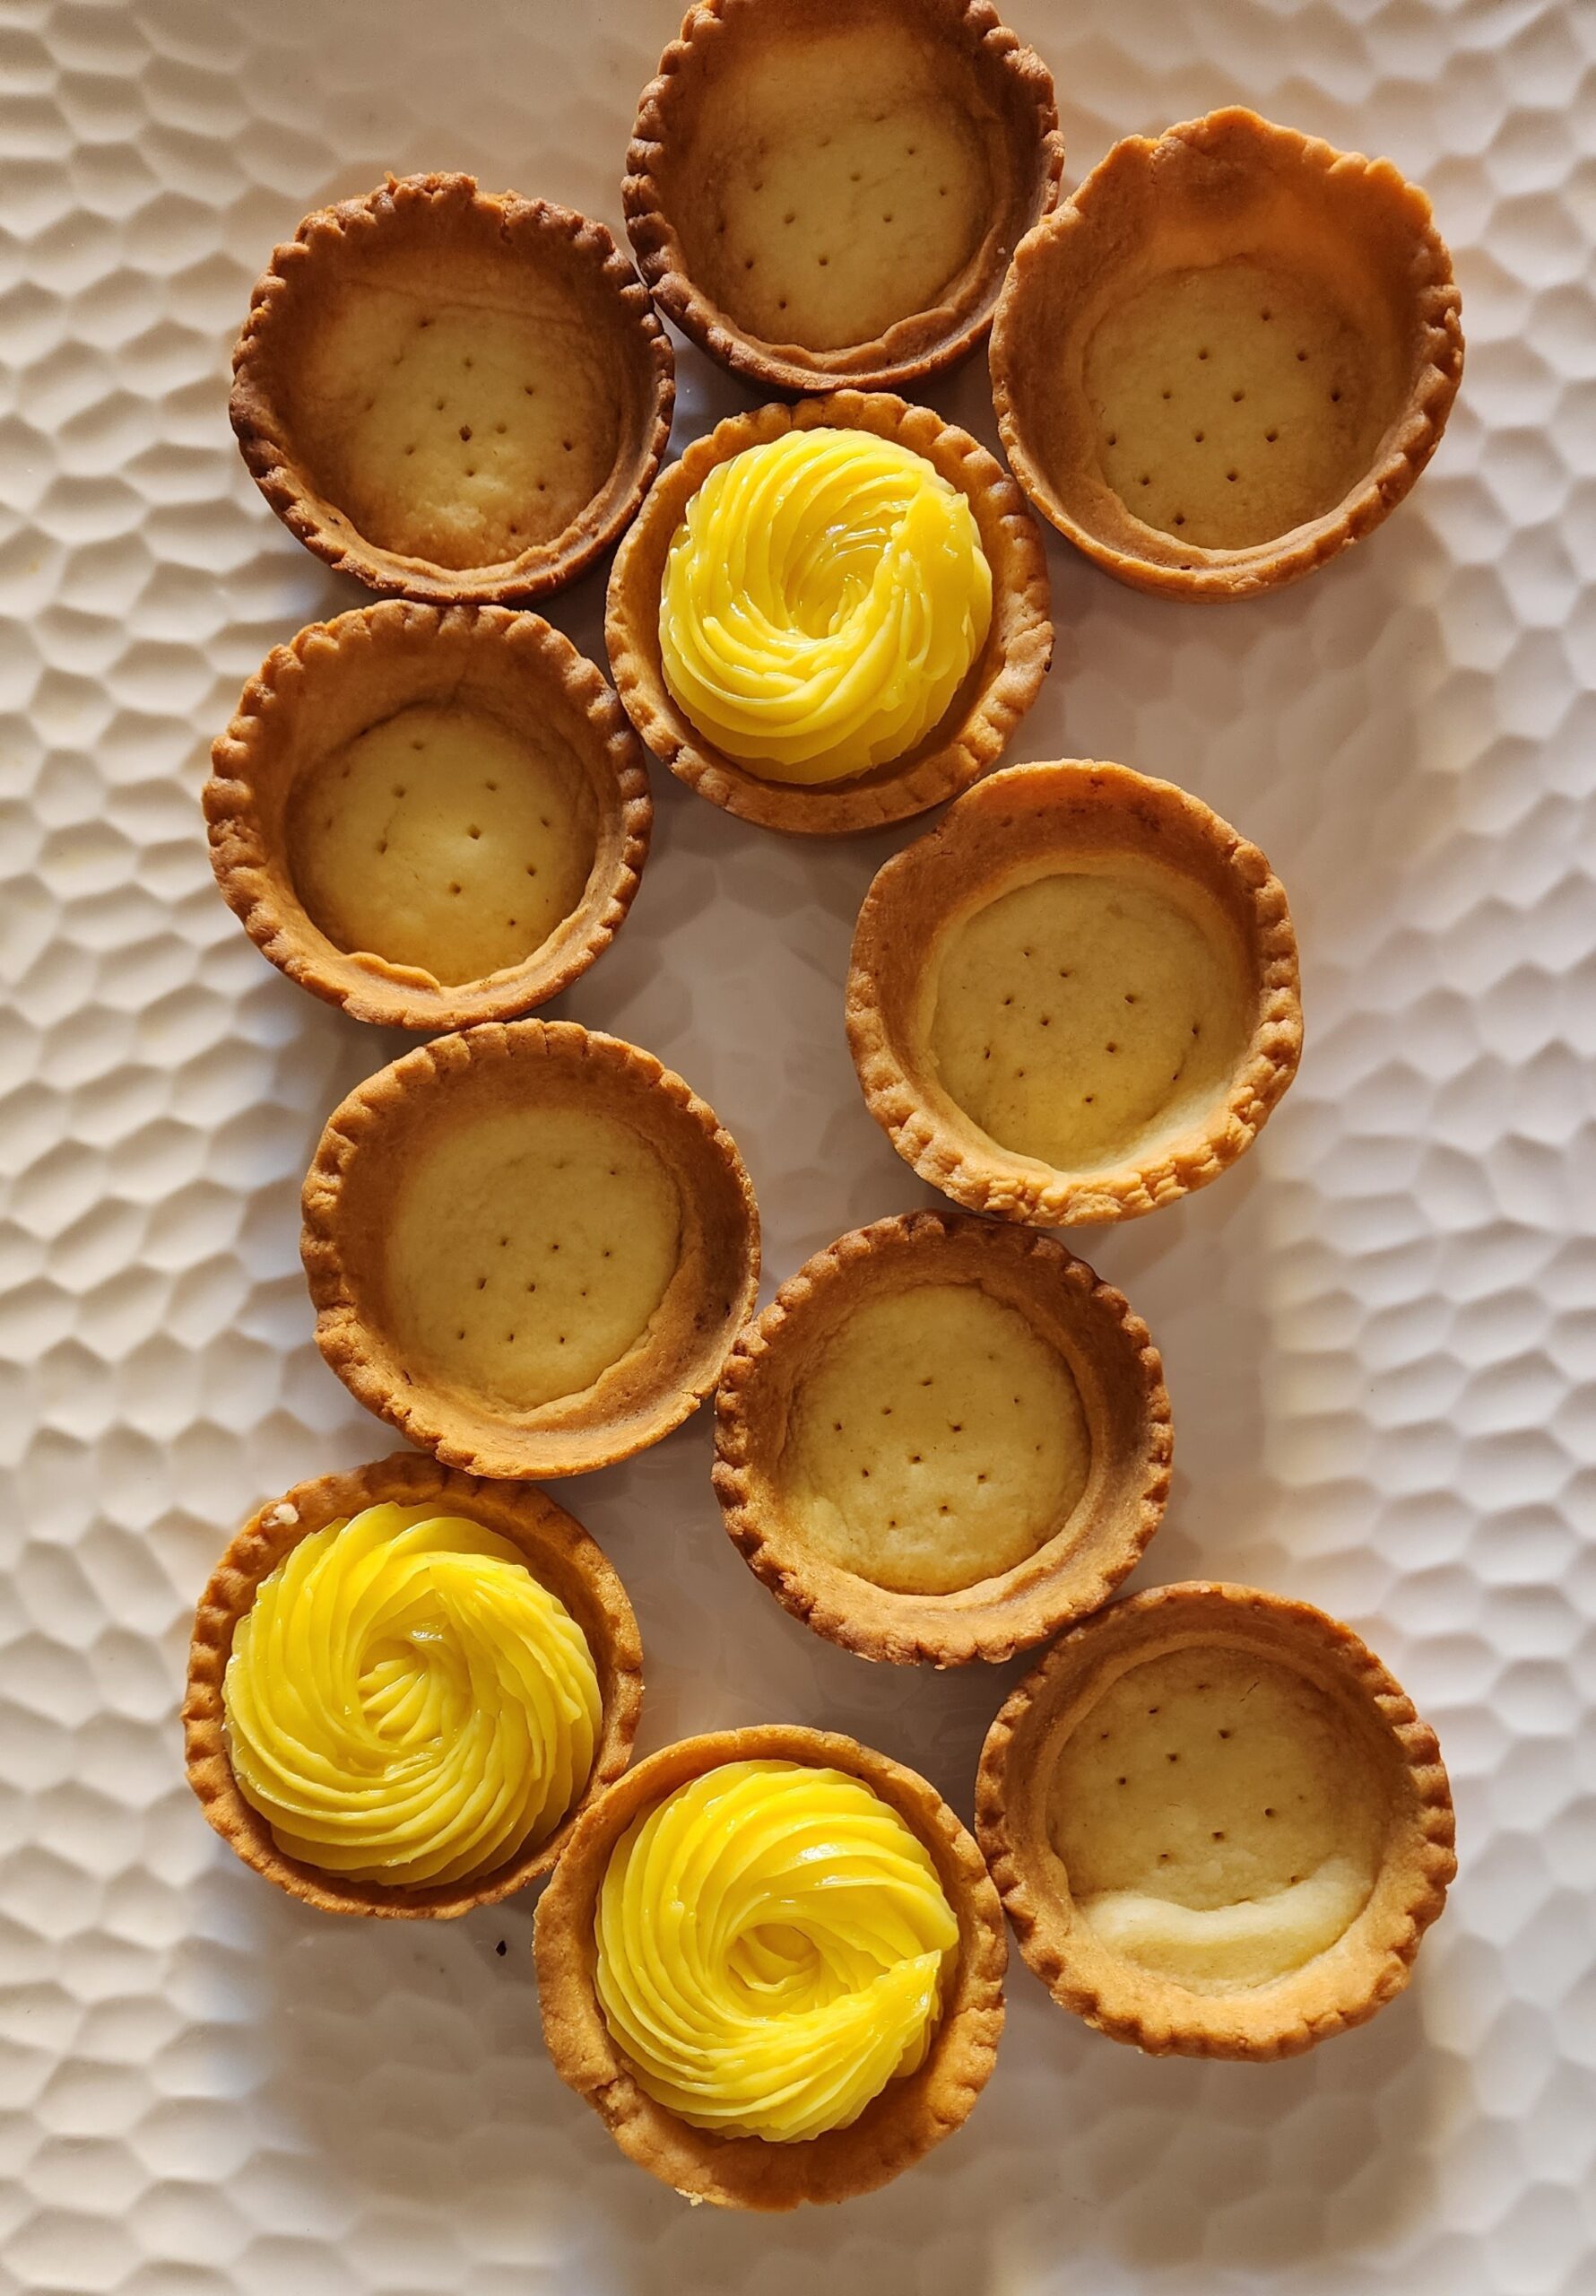 Eleven baked tart shells placed on a white platter with some of the shells filled inside with lemon curd filling 